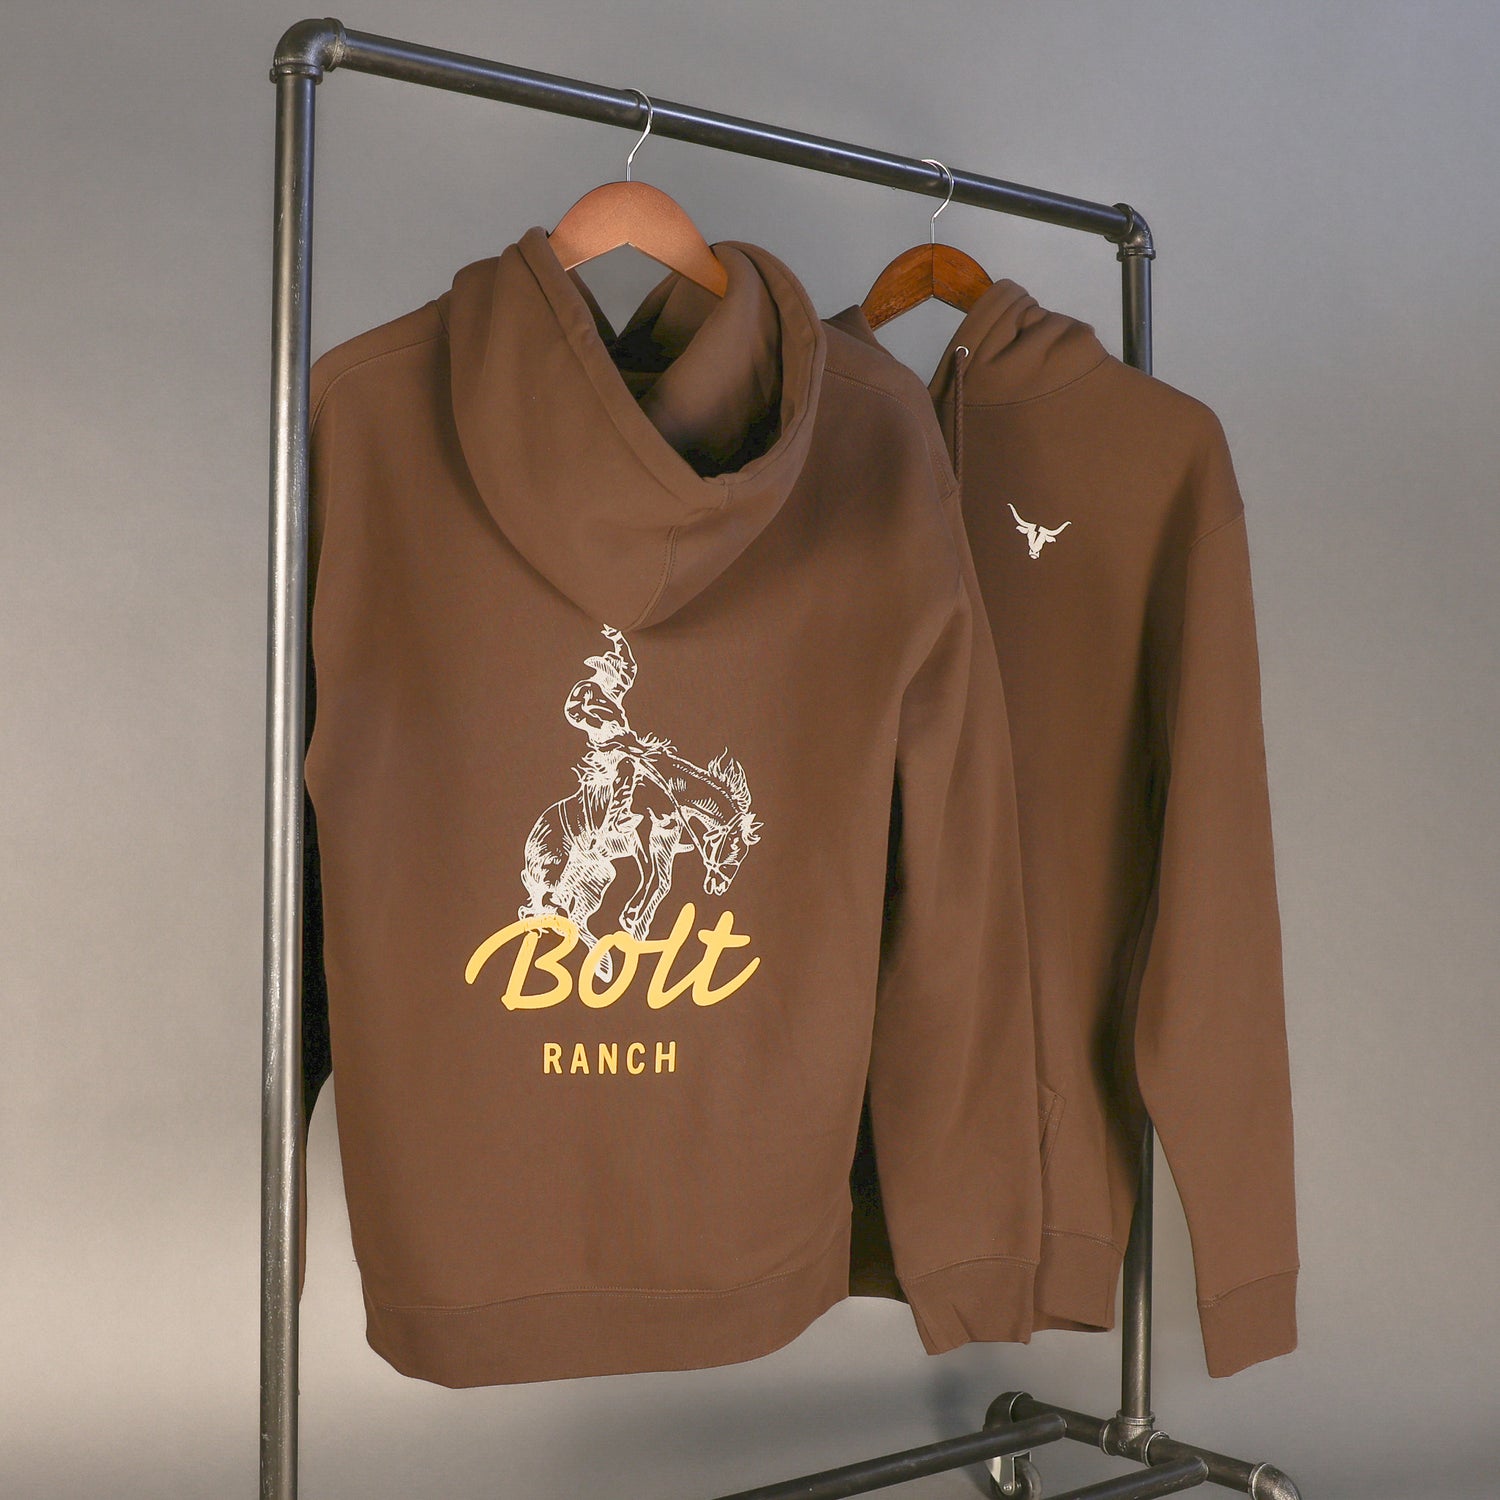 Bolt Ranch Harvest Collection - Adult Hoodie - Chocolate